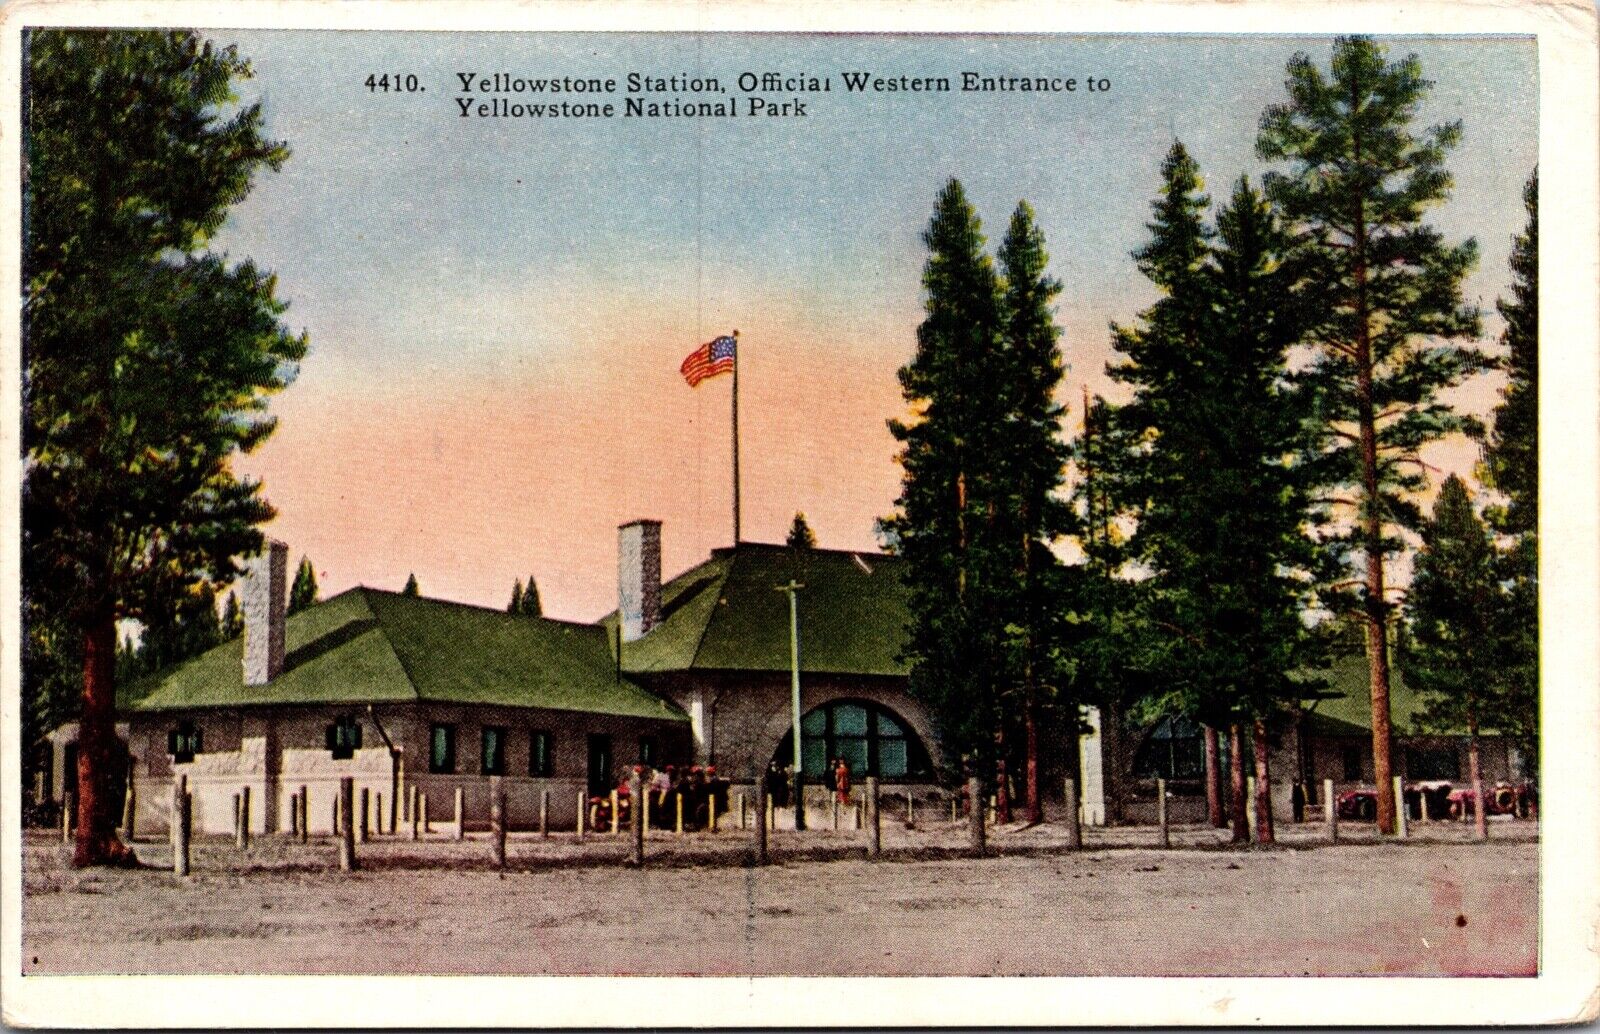 PC Yellowstone Station Official Western Entrance to Yellowstone National Park